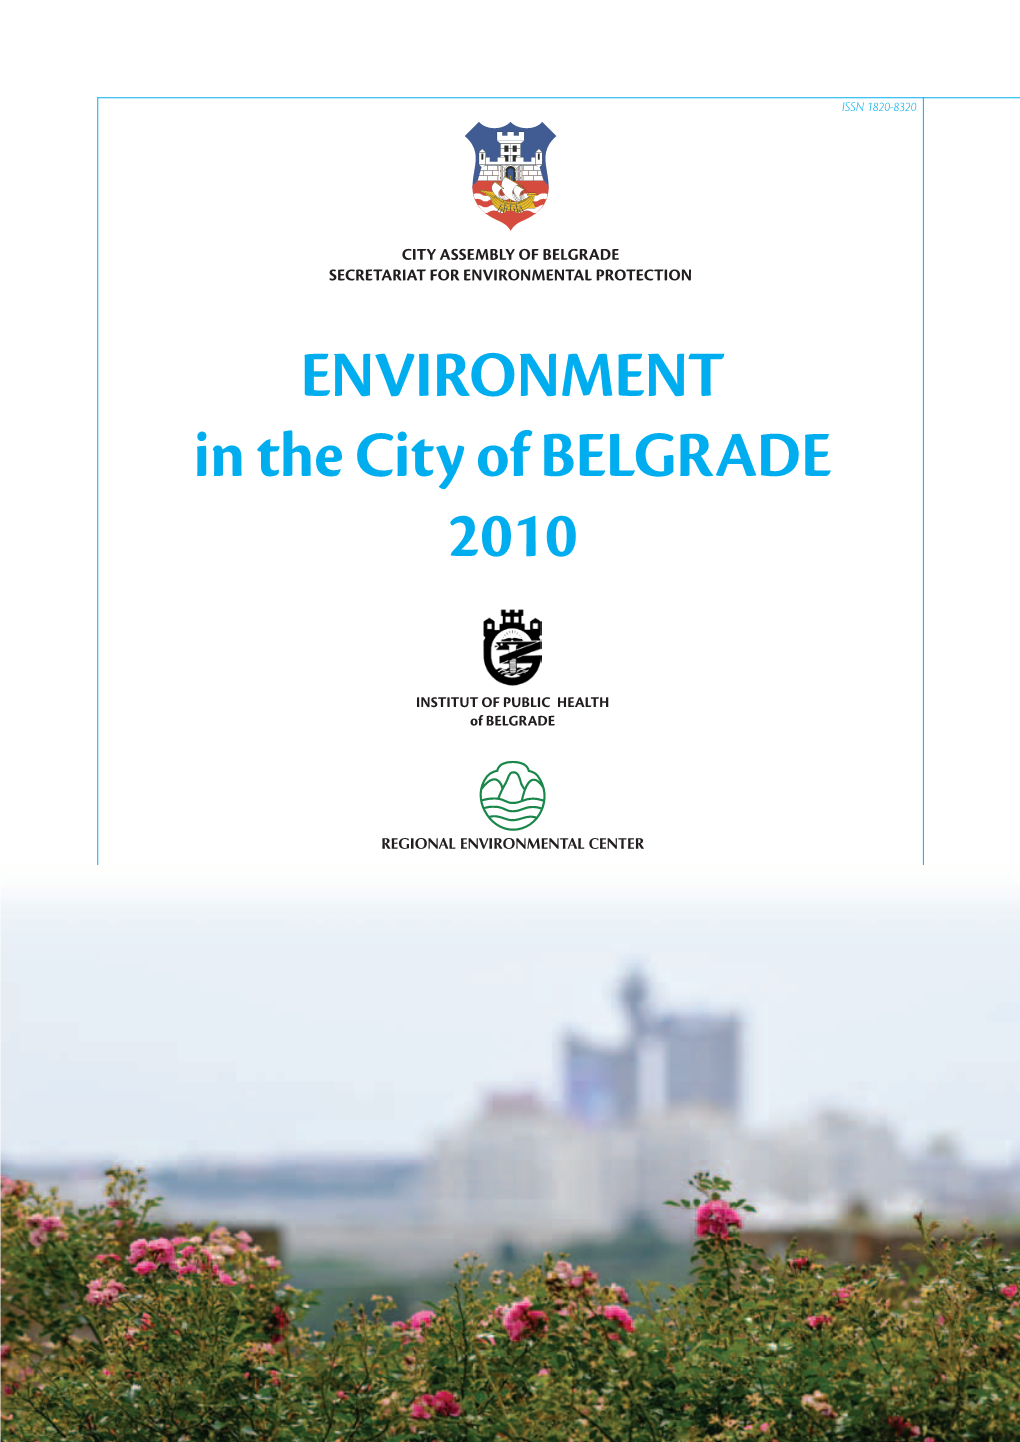 ENVIRONMENT in the City of BELGRADE 2010